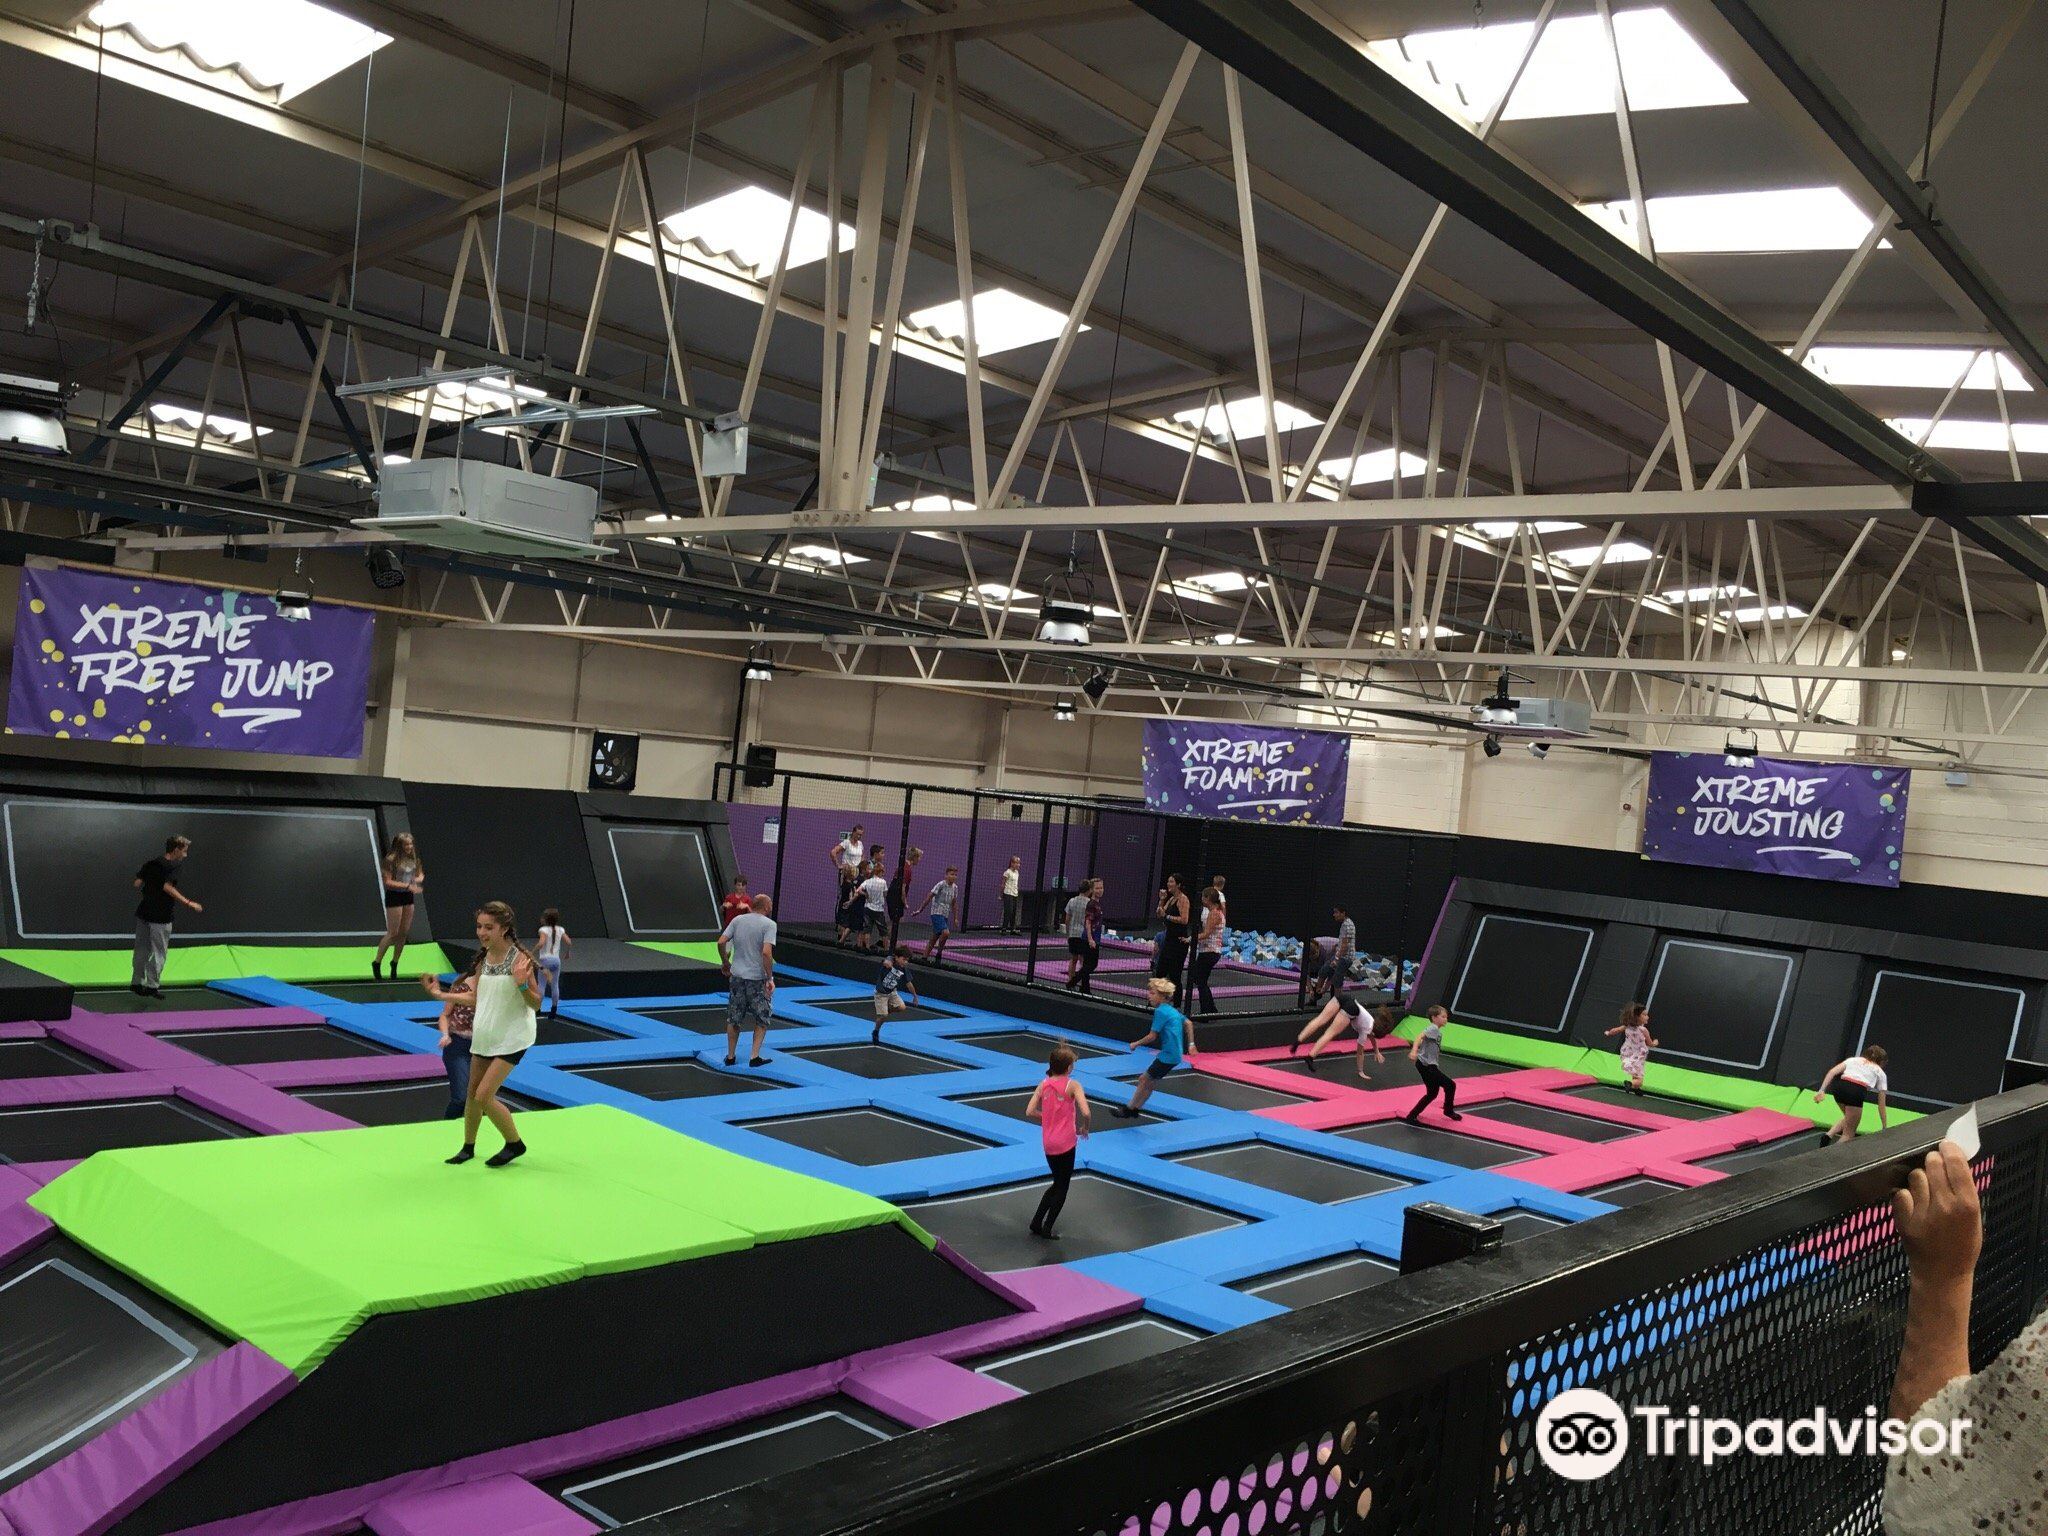 Latest travel itineraries for Xtreme360 Trampoline Park in November  (updated in 2023), Xtreme360 Trampoline Park reviews, Xtreme360 Trampoline  Park address and opening hours, popular attractions, hotels, and  restaurants near Xtreme360 Trampoline Park -